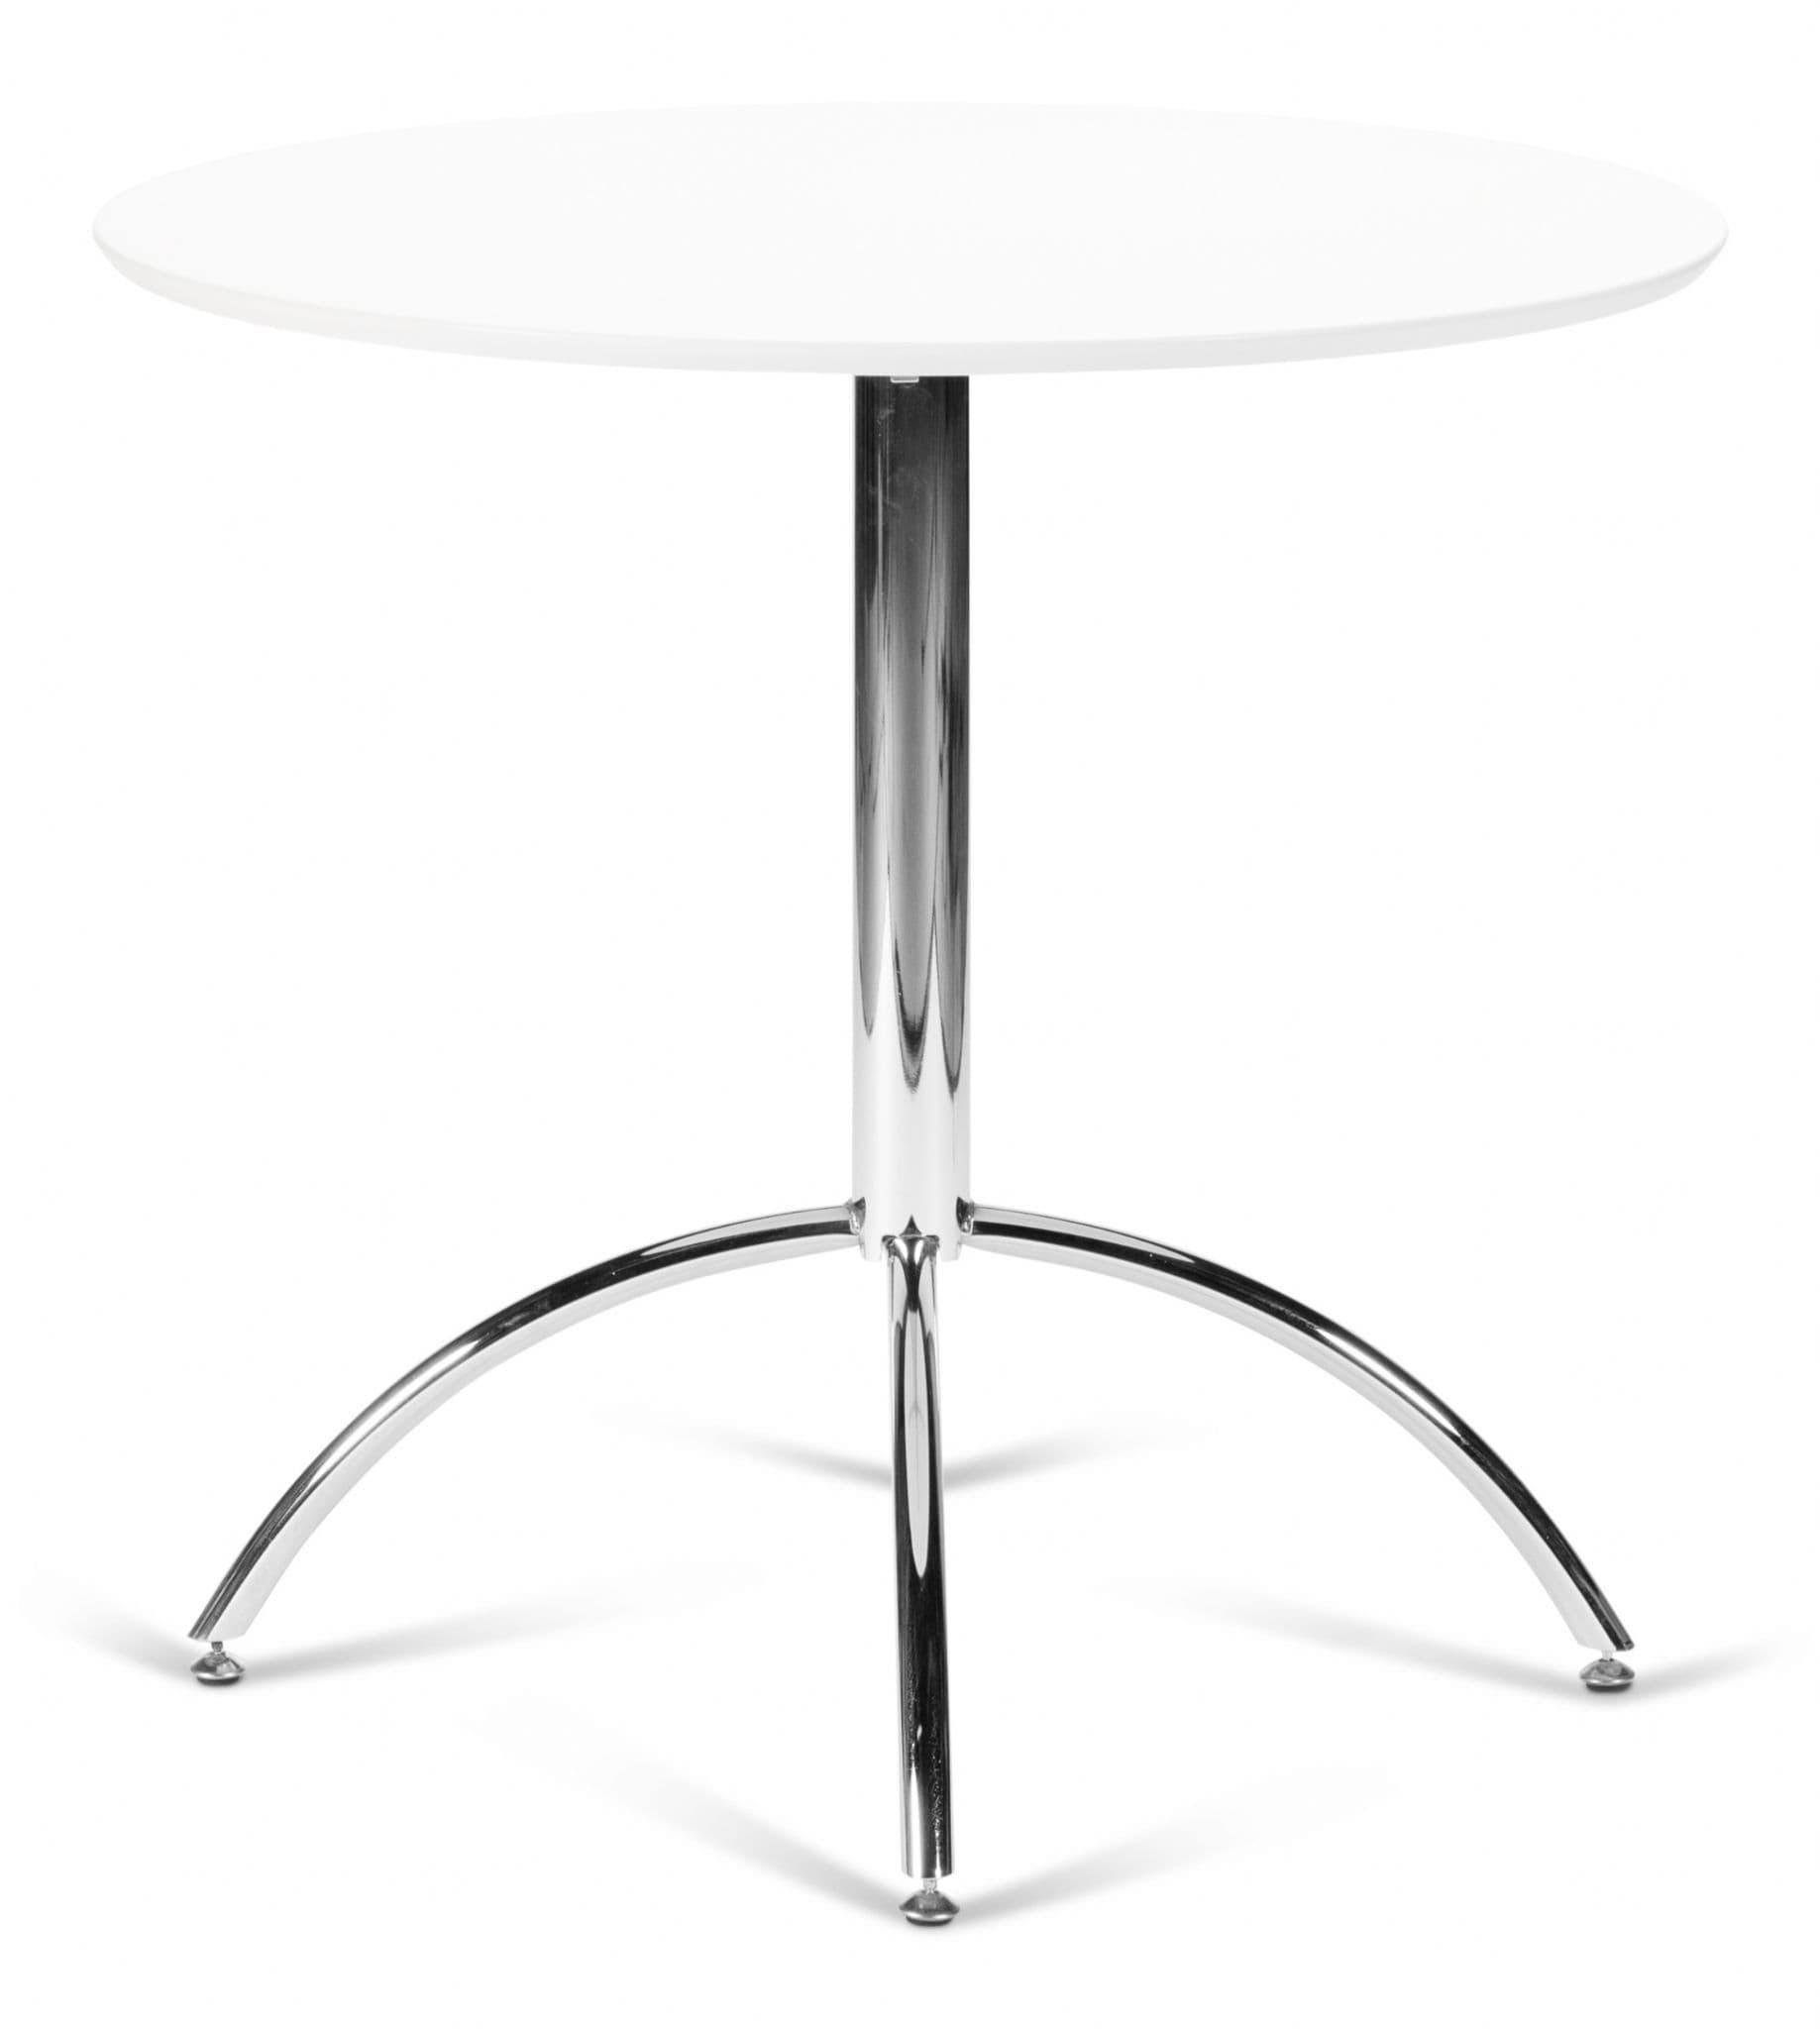 Kimberley Dining Set White Table & 2 Black Chairs - Kimberley White Table